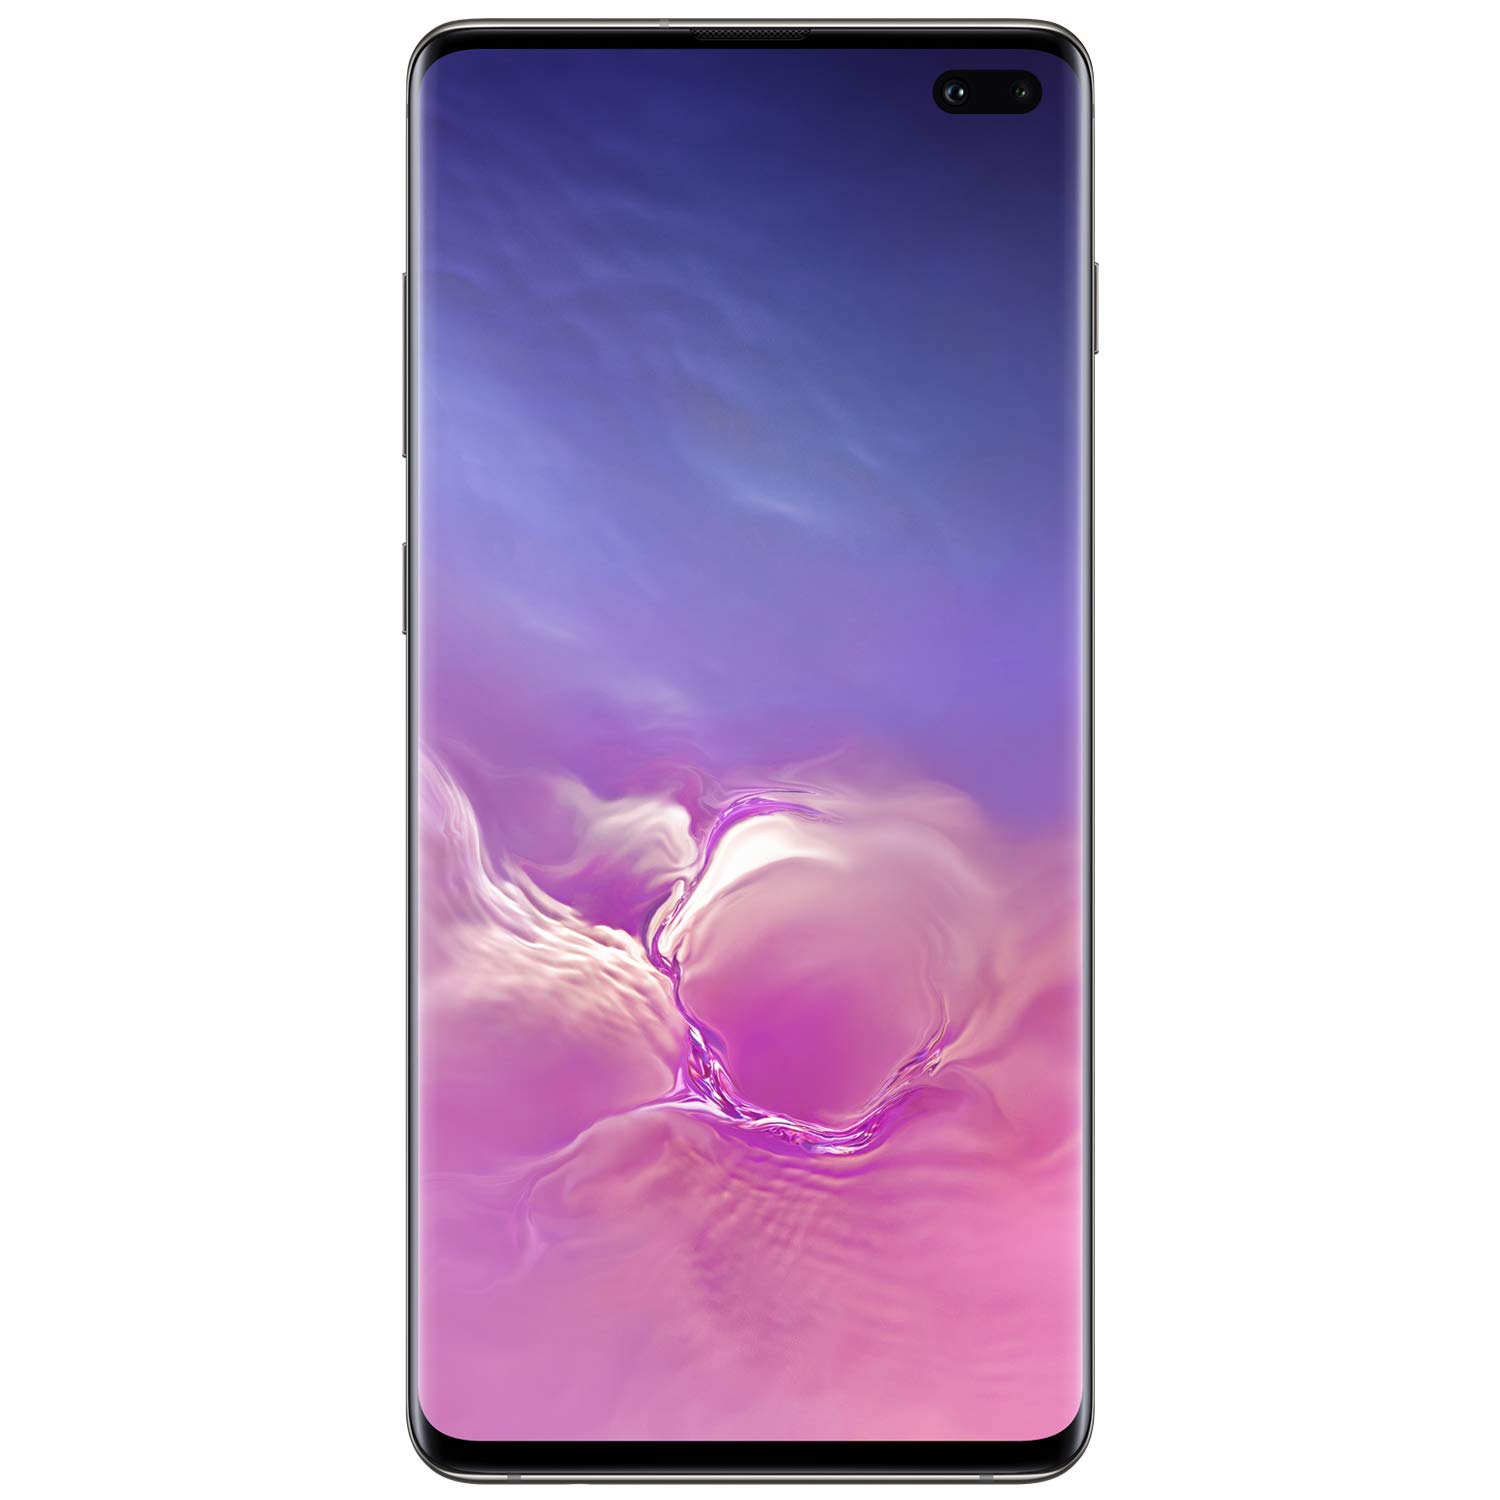 Samsung Galaxy S10+ Factory Unlocked Android Cell Phone | US Version | 128GB of Storage | Fingerprint ID and Facial Recognition | Long-Lasting Battery | U.S. Warranty | Prism Black